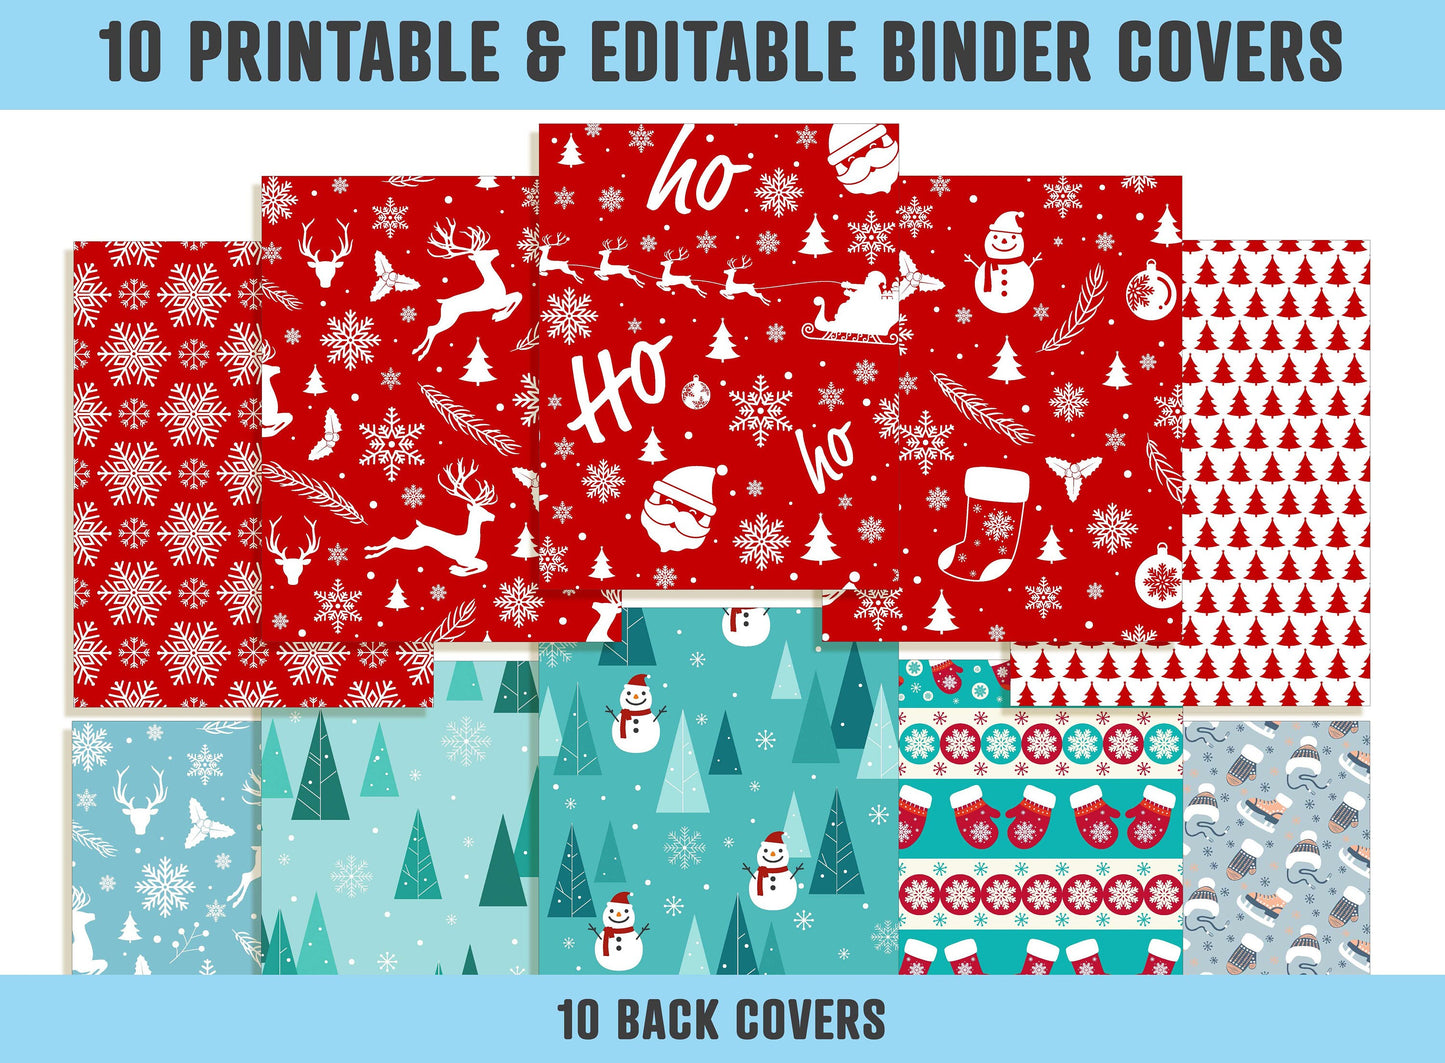 Christmas, Snowman, Santa Claus, Snowflakes, Winter Binder Cover, 10 Printable & Editable Binder Covers + Spines, Holiday Planner Template